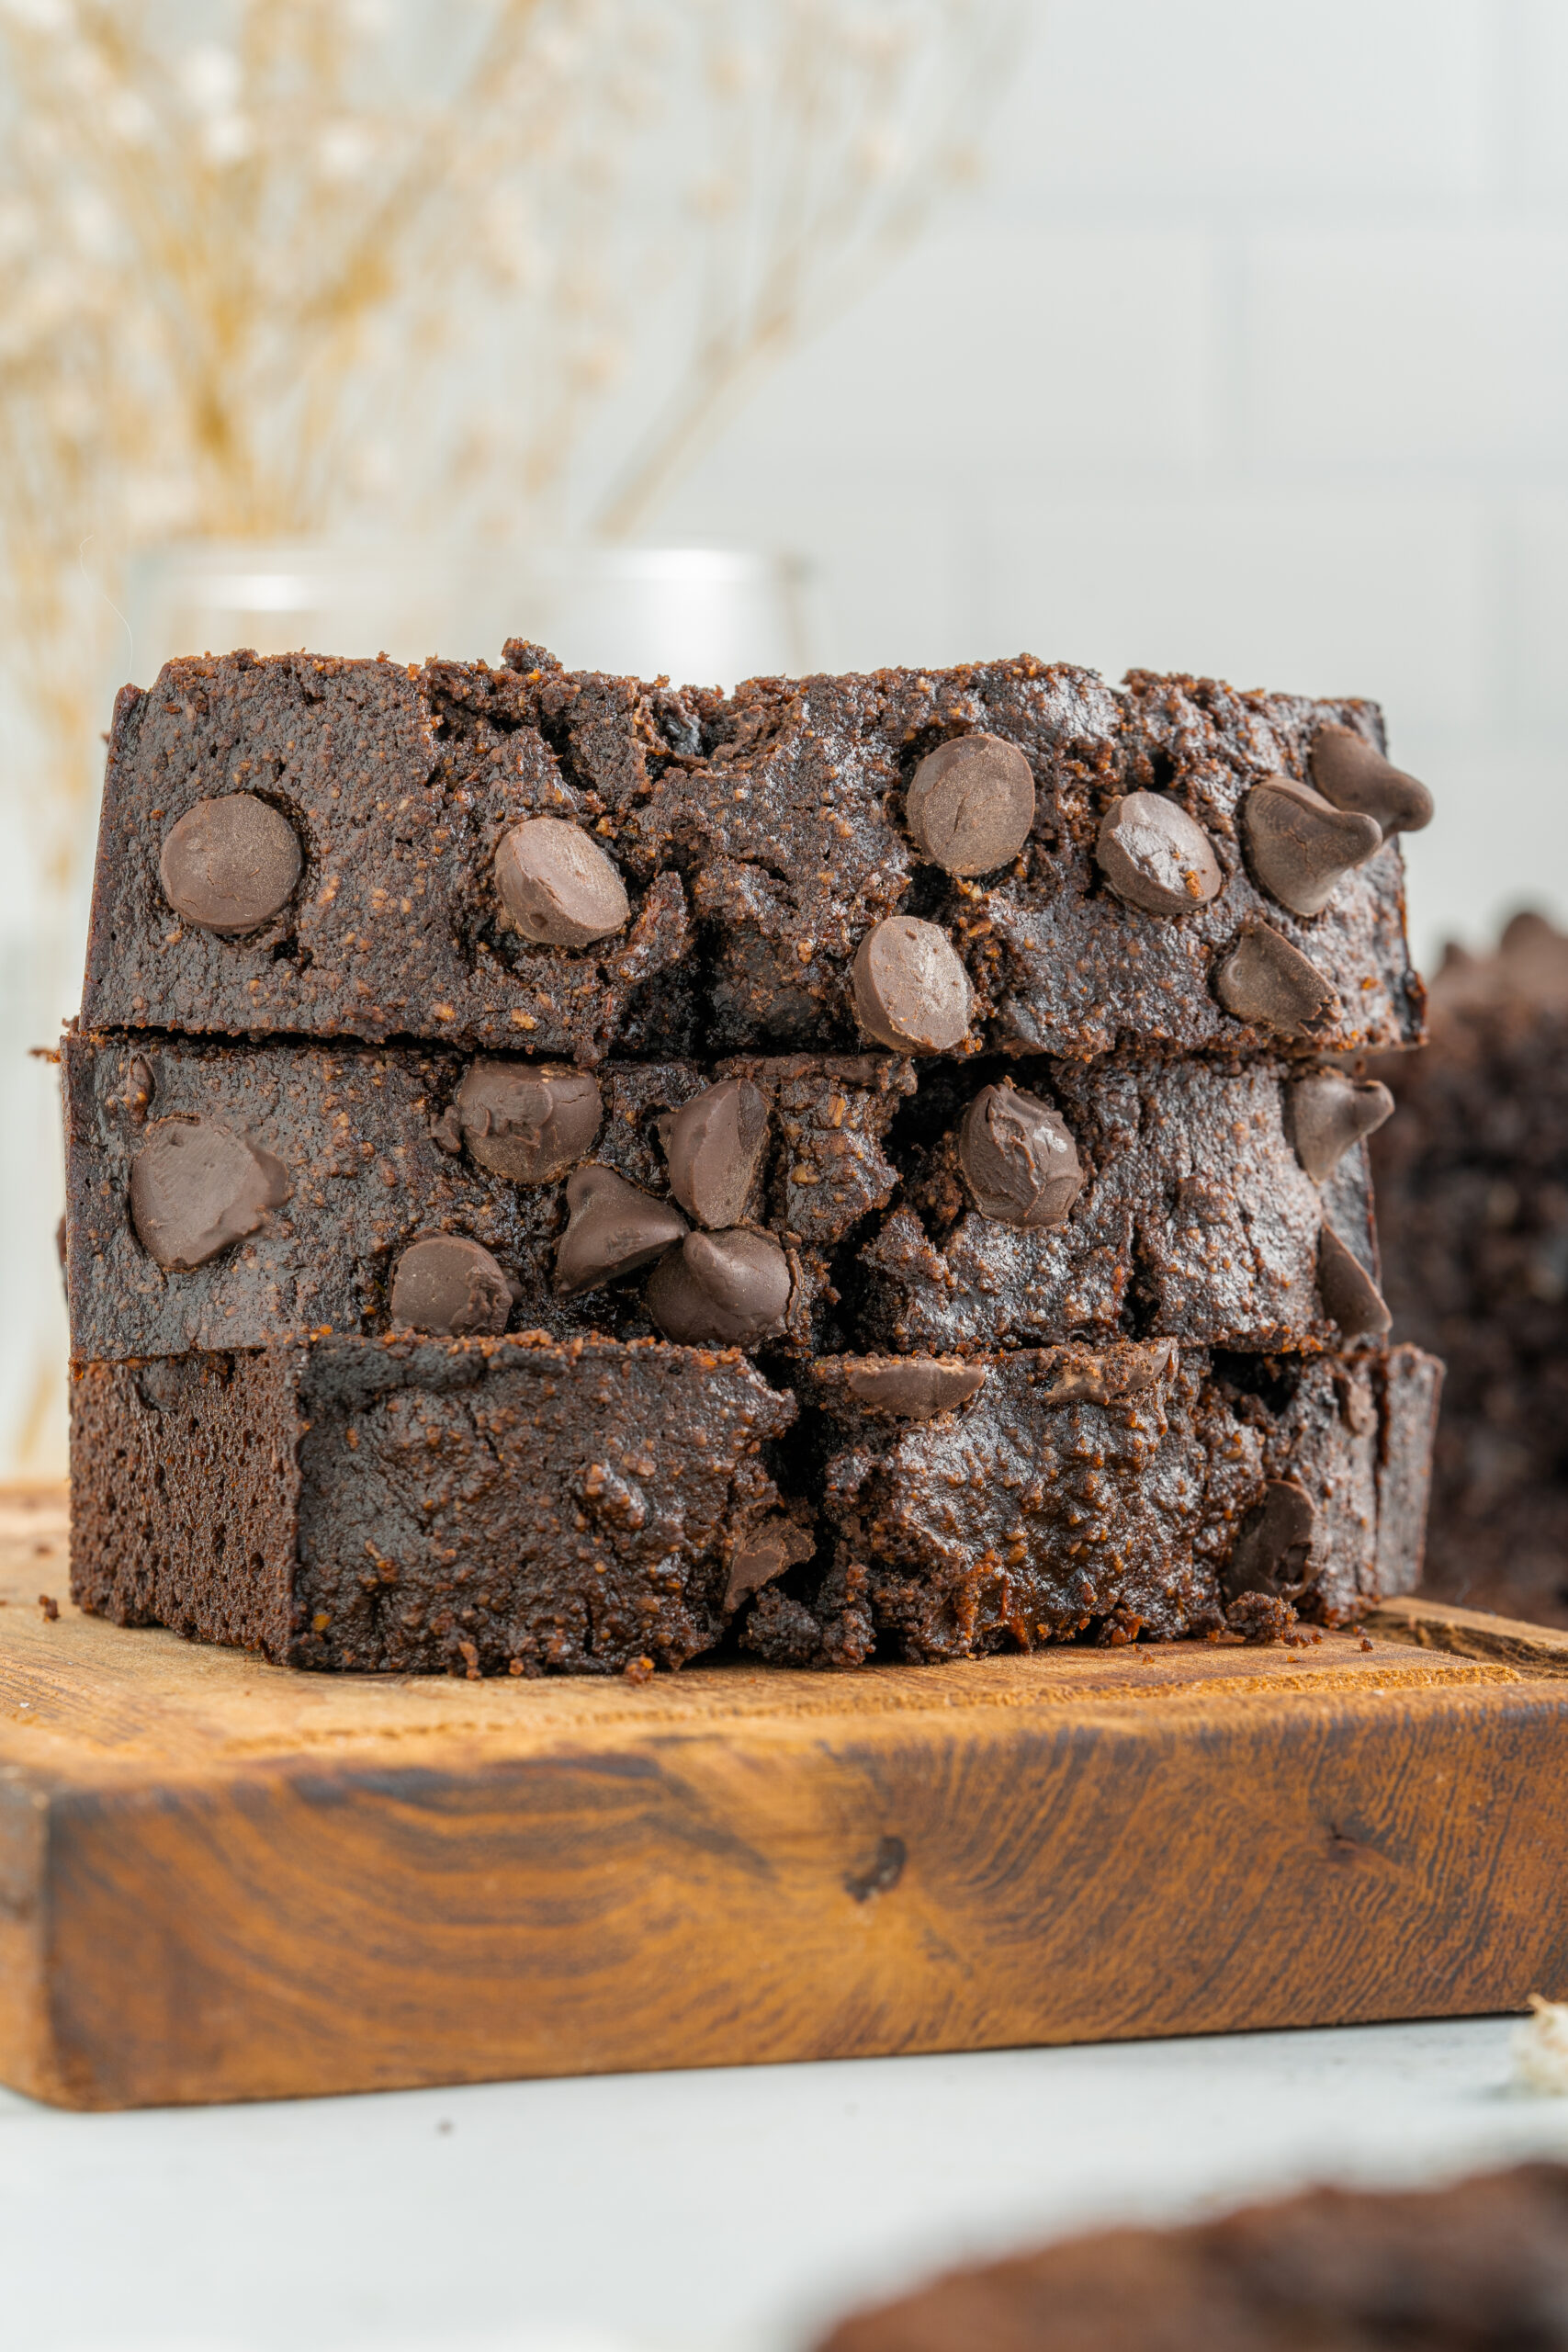 Stacked slices of chocolate zucchini bread.